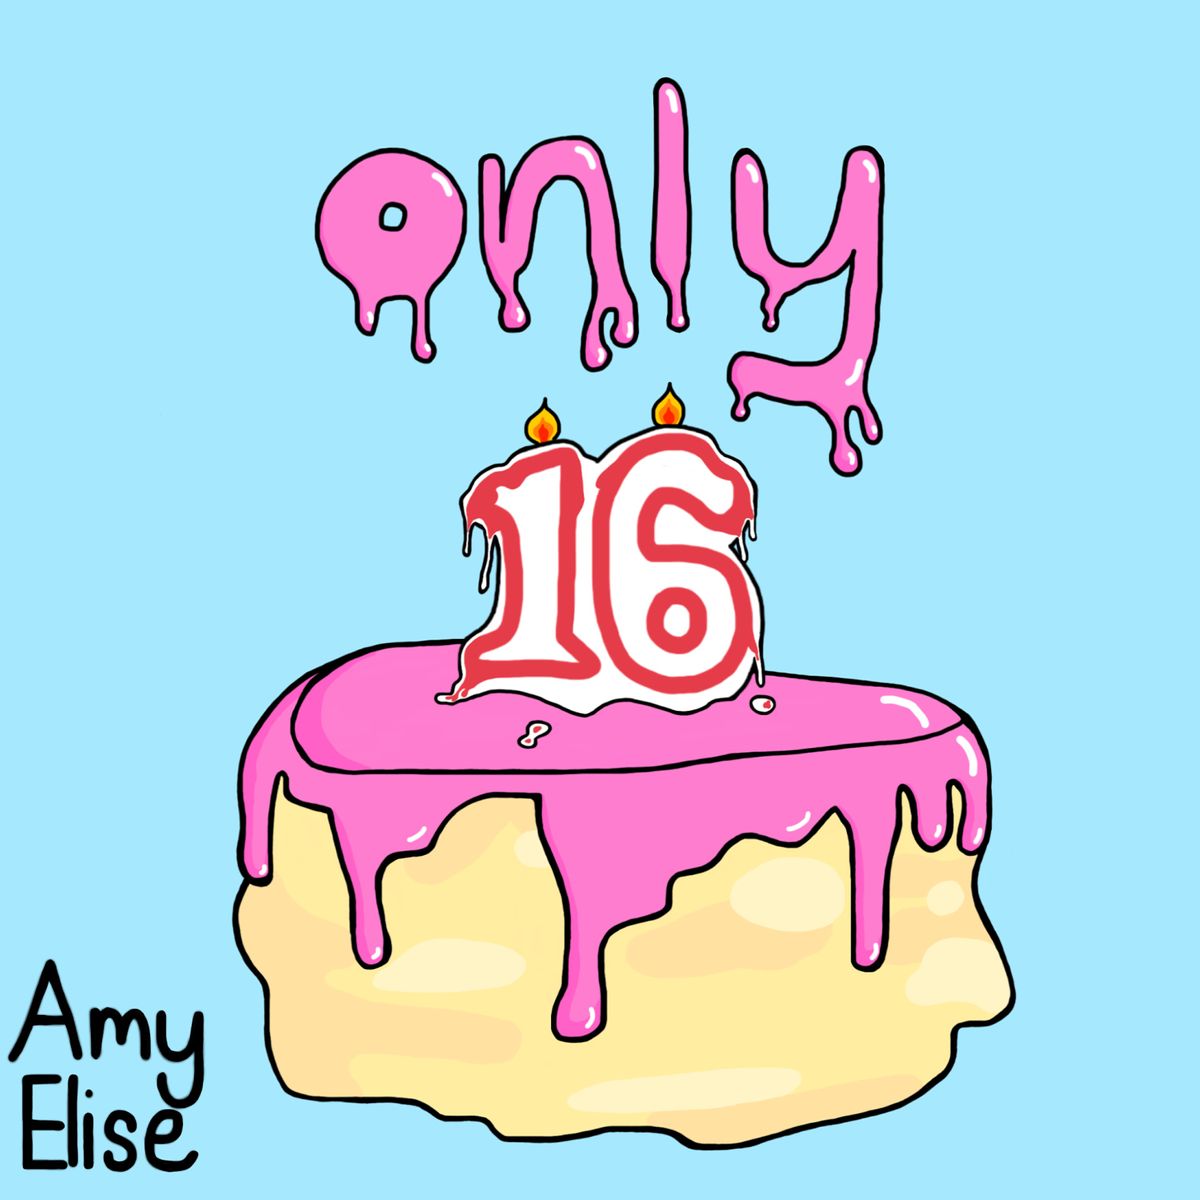 Amy Elise - Only 16 single release - supported by Everso & Hicktown Barnaby